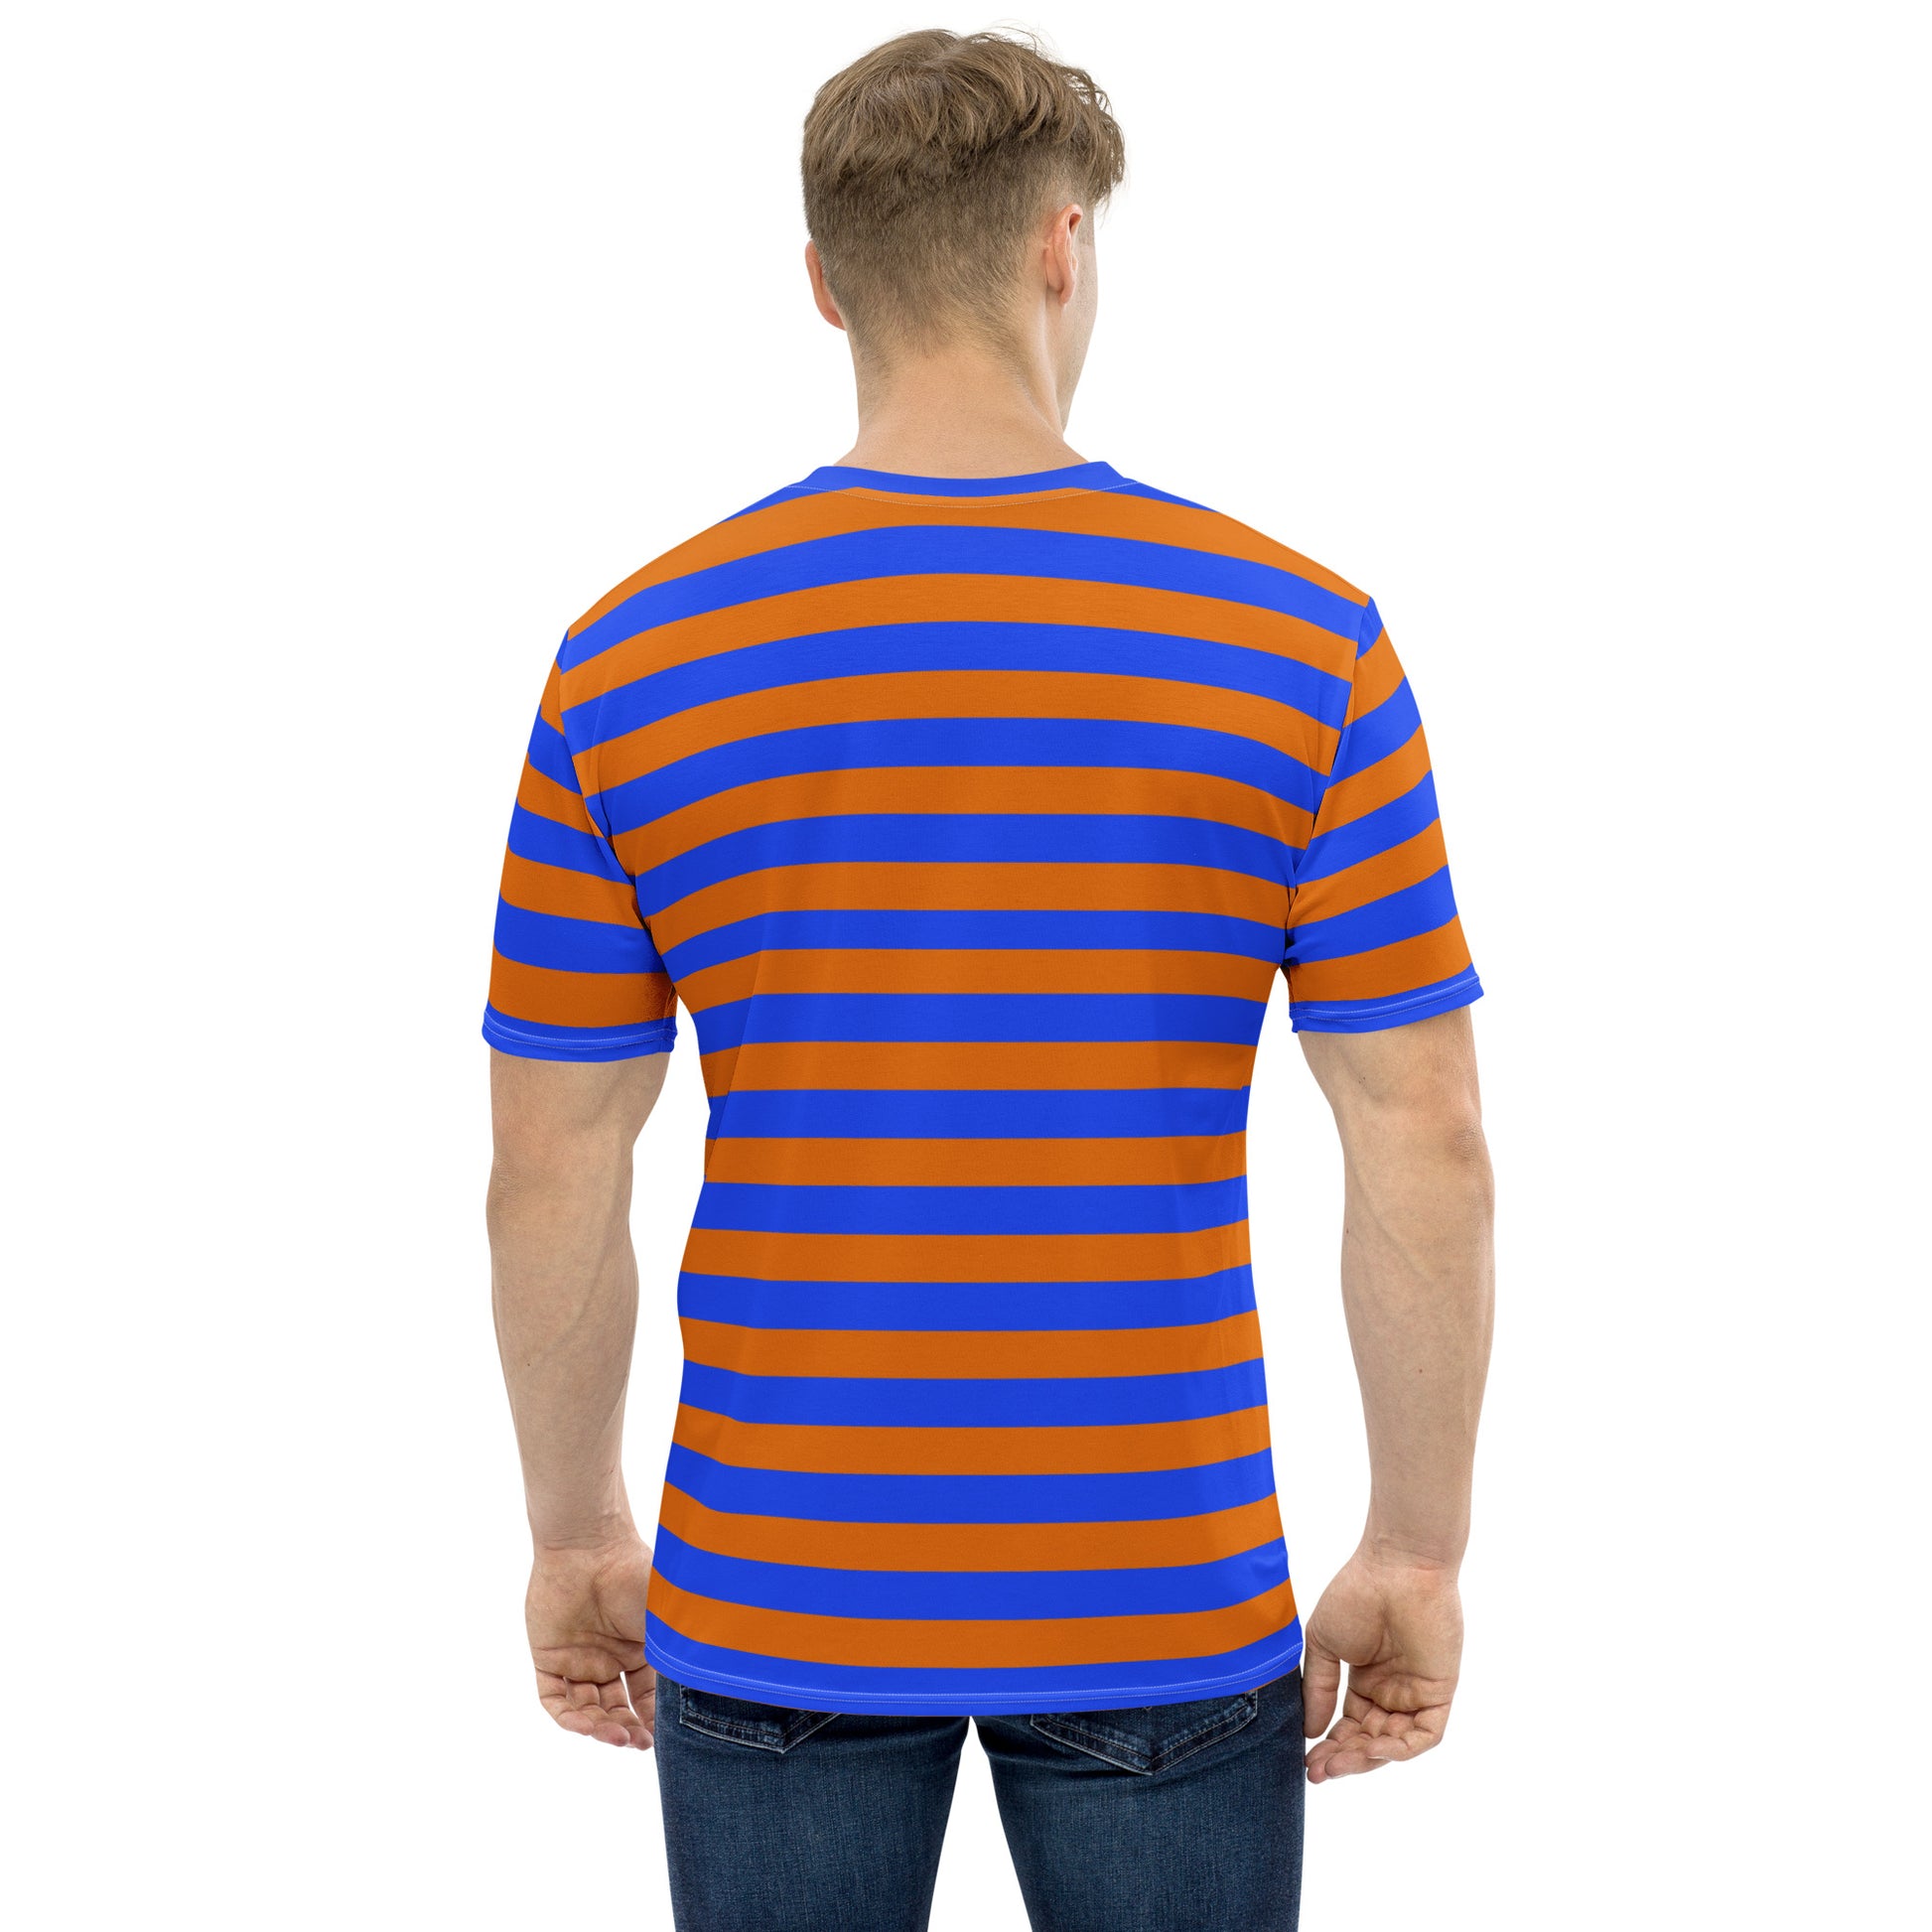 Casual blue and orange striped men's T-shirt